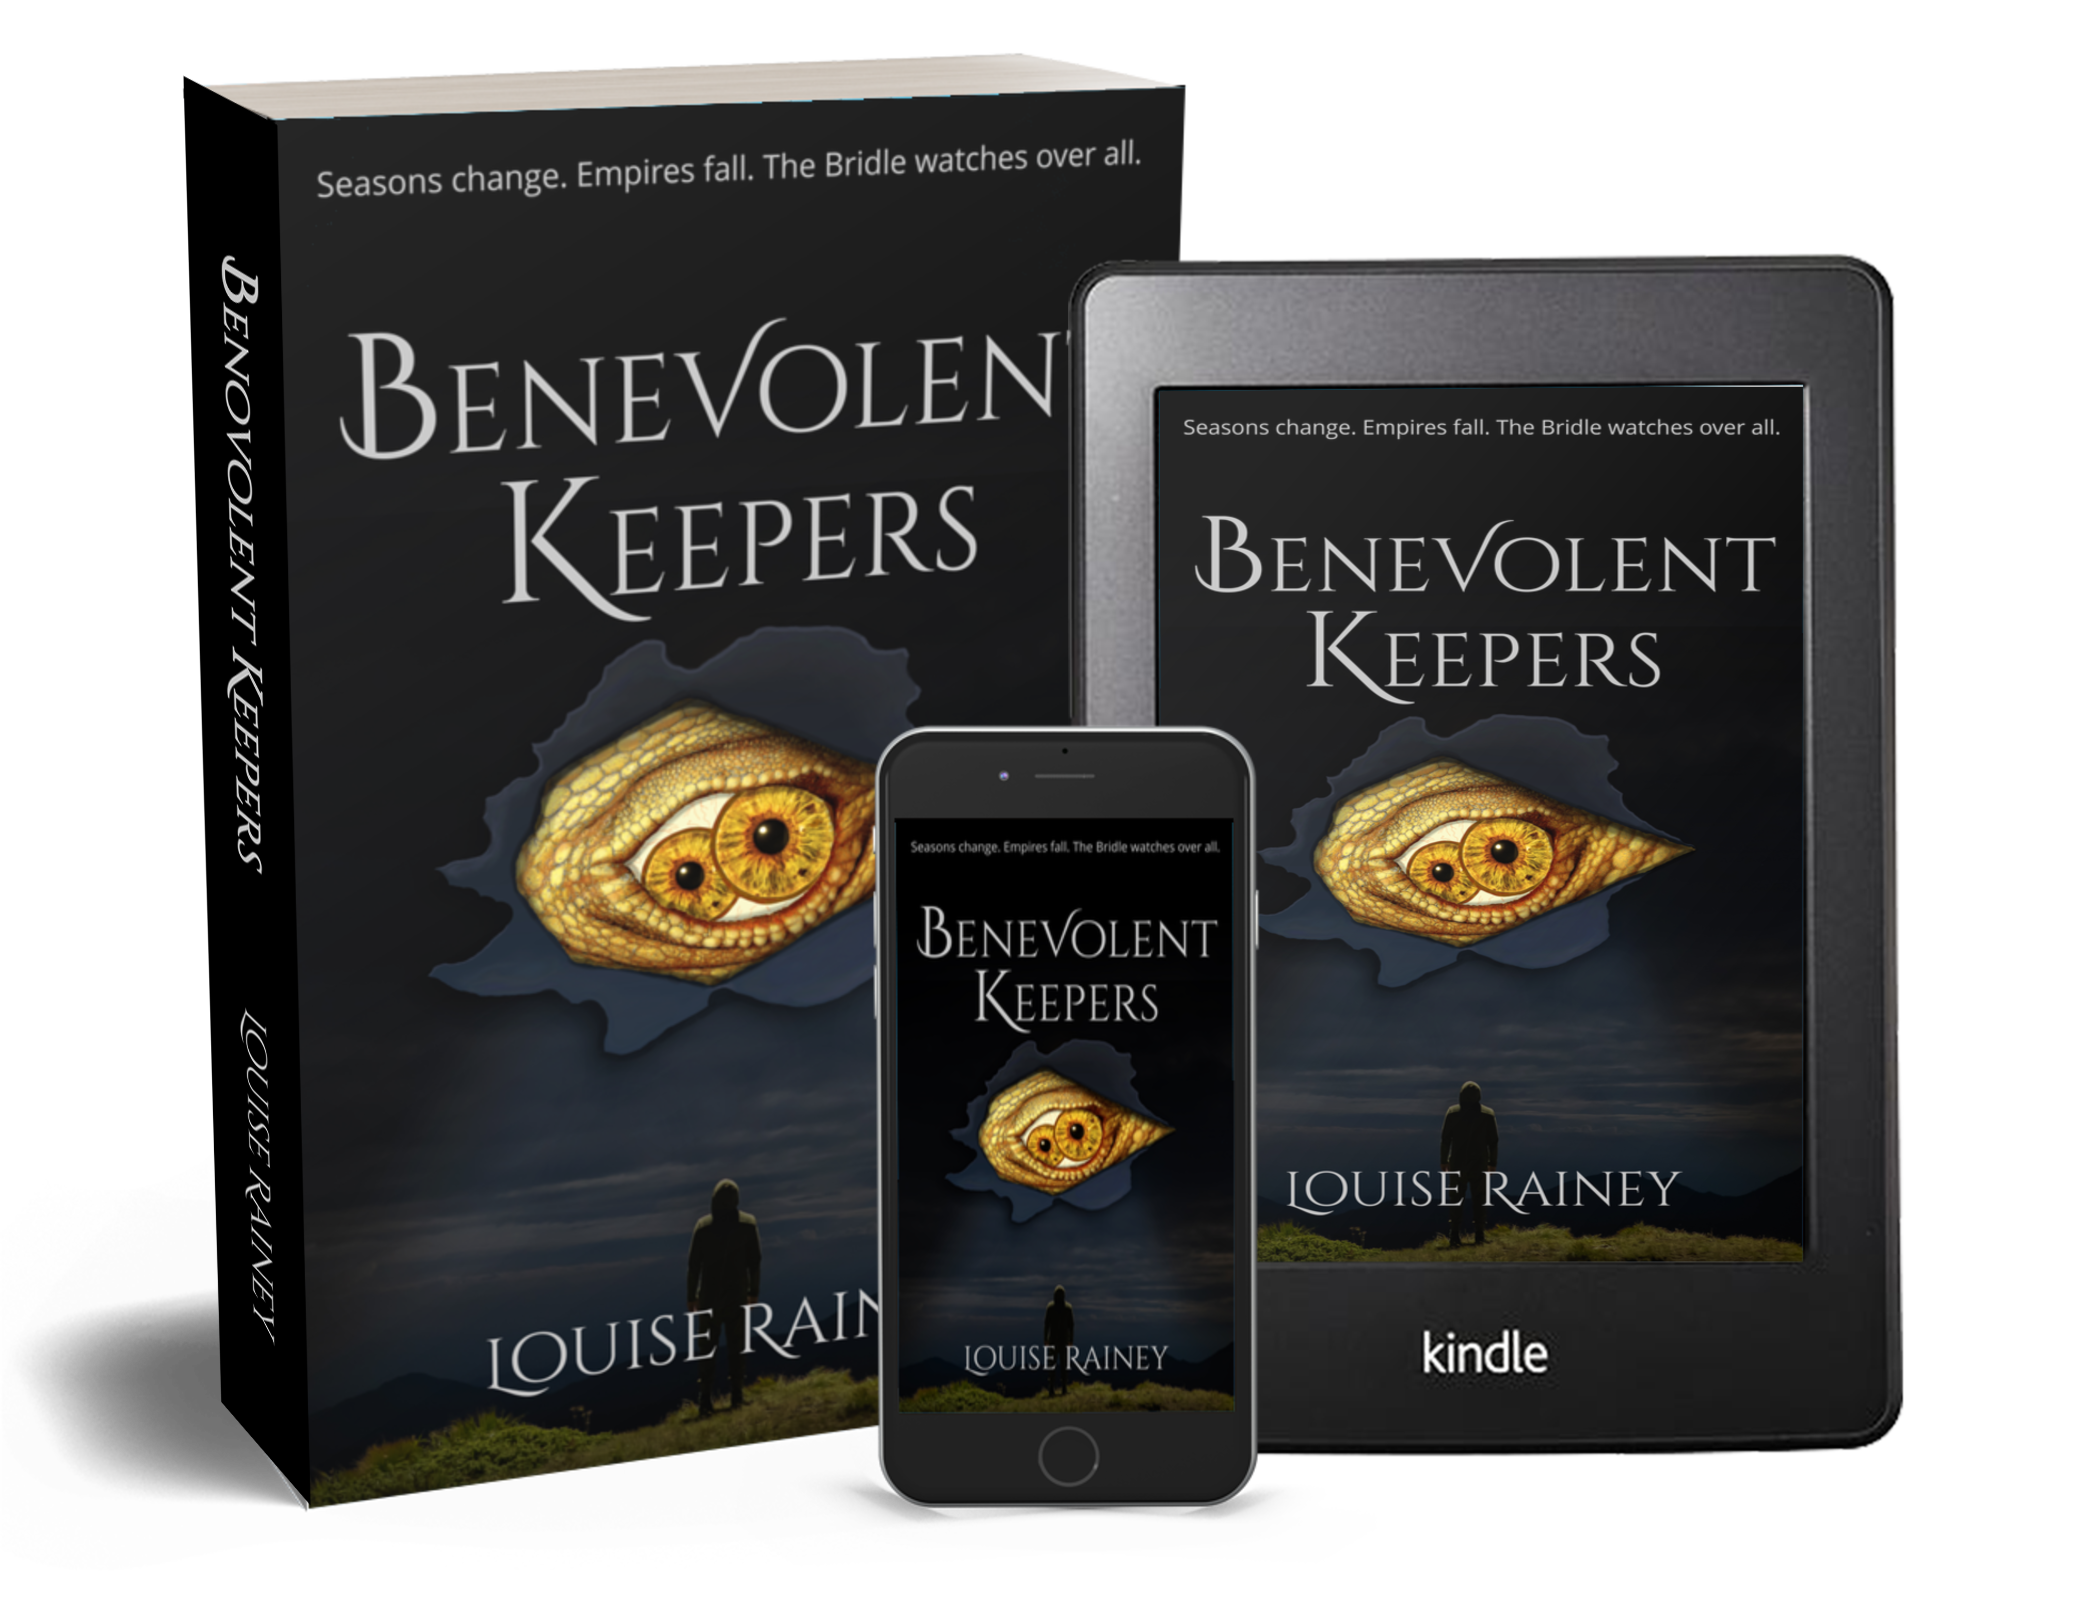 Benevolent Keepers-book and kindle